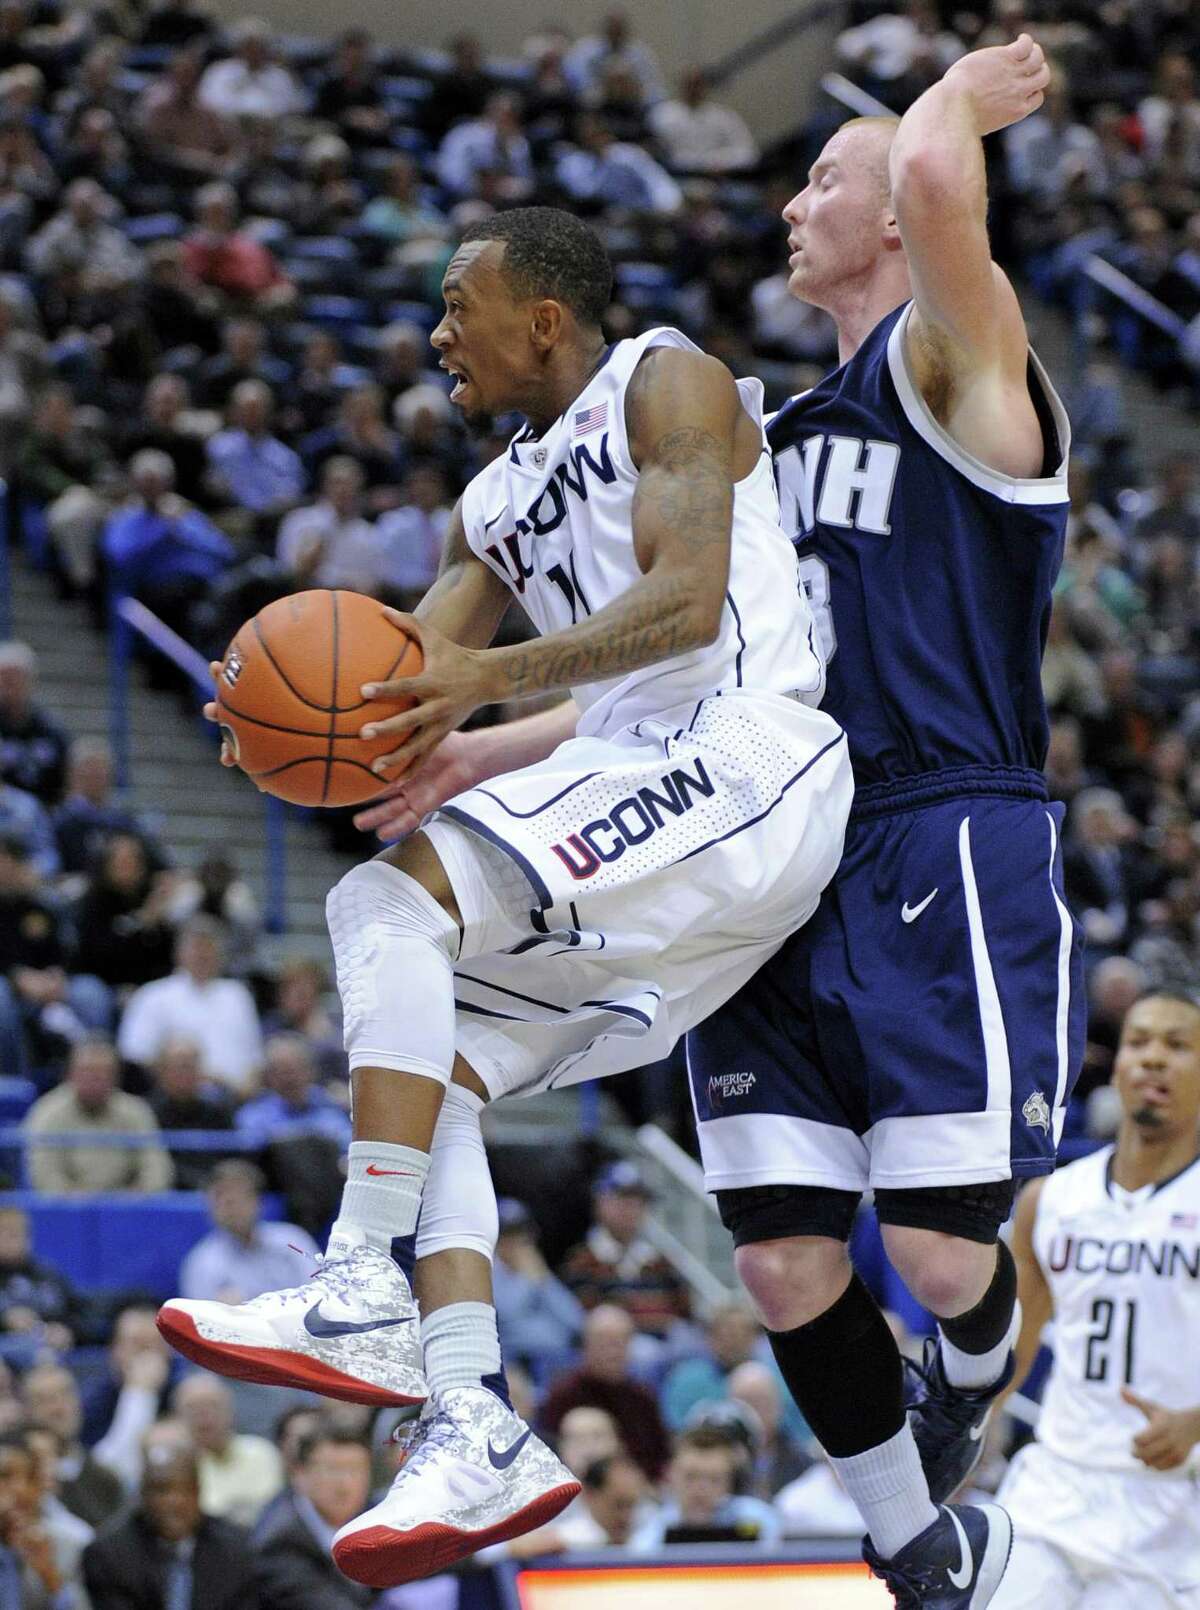 Connecticut's Ryan Boatright, left, drives past New Hampshire's Chandler Rhoads during the second half of an NCAA college basketball game in Hartford, Conn., Thursday, Nov. 29, 2012. Boatright scored a team-high 19 points in Connecticut's 61-53 victory. (AP Photo/Fred Beckham)